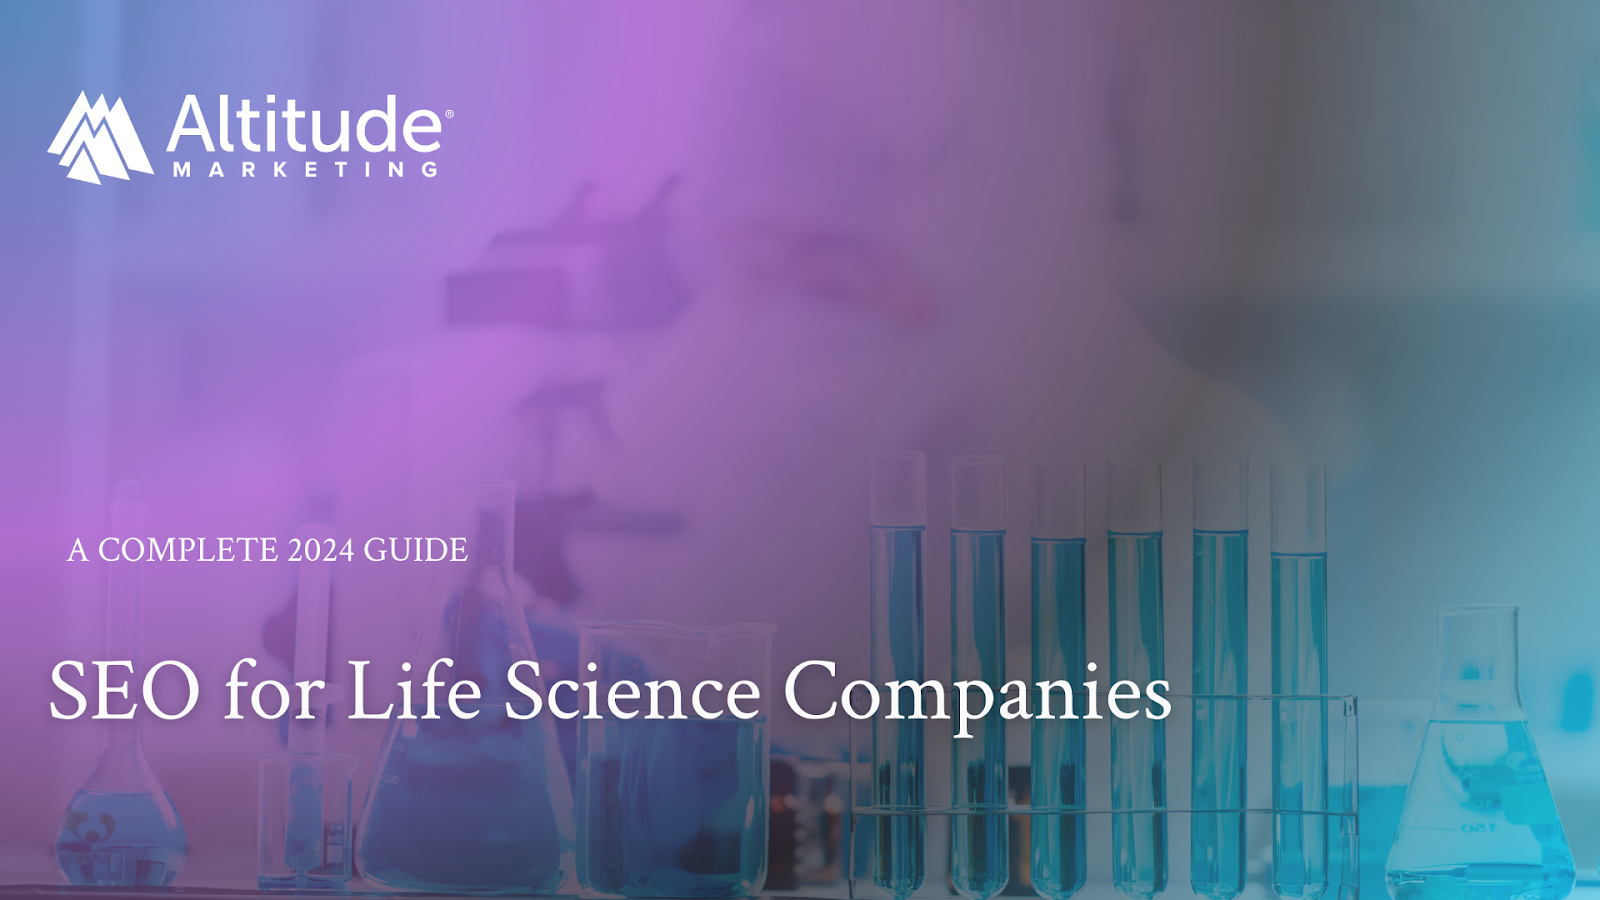 SEO for Life Sciences Companies: A Complete 2024 Guide